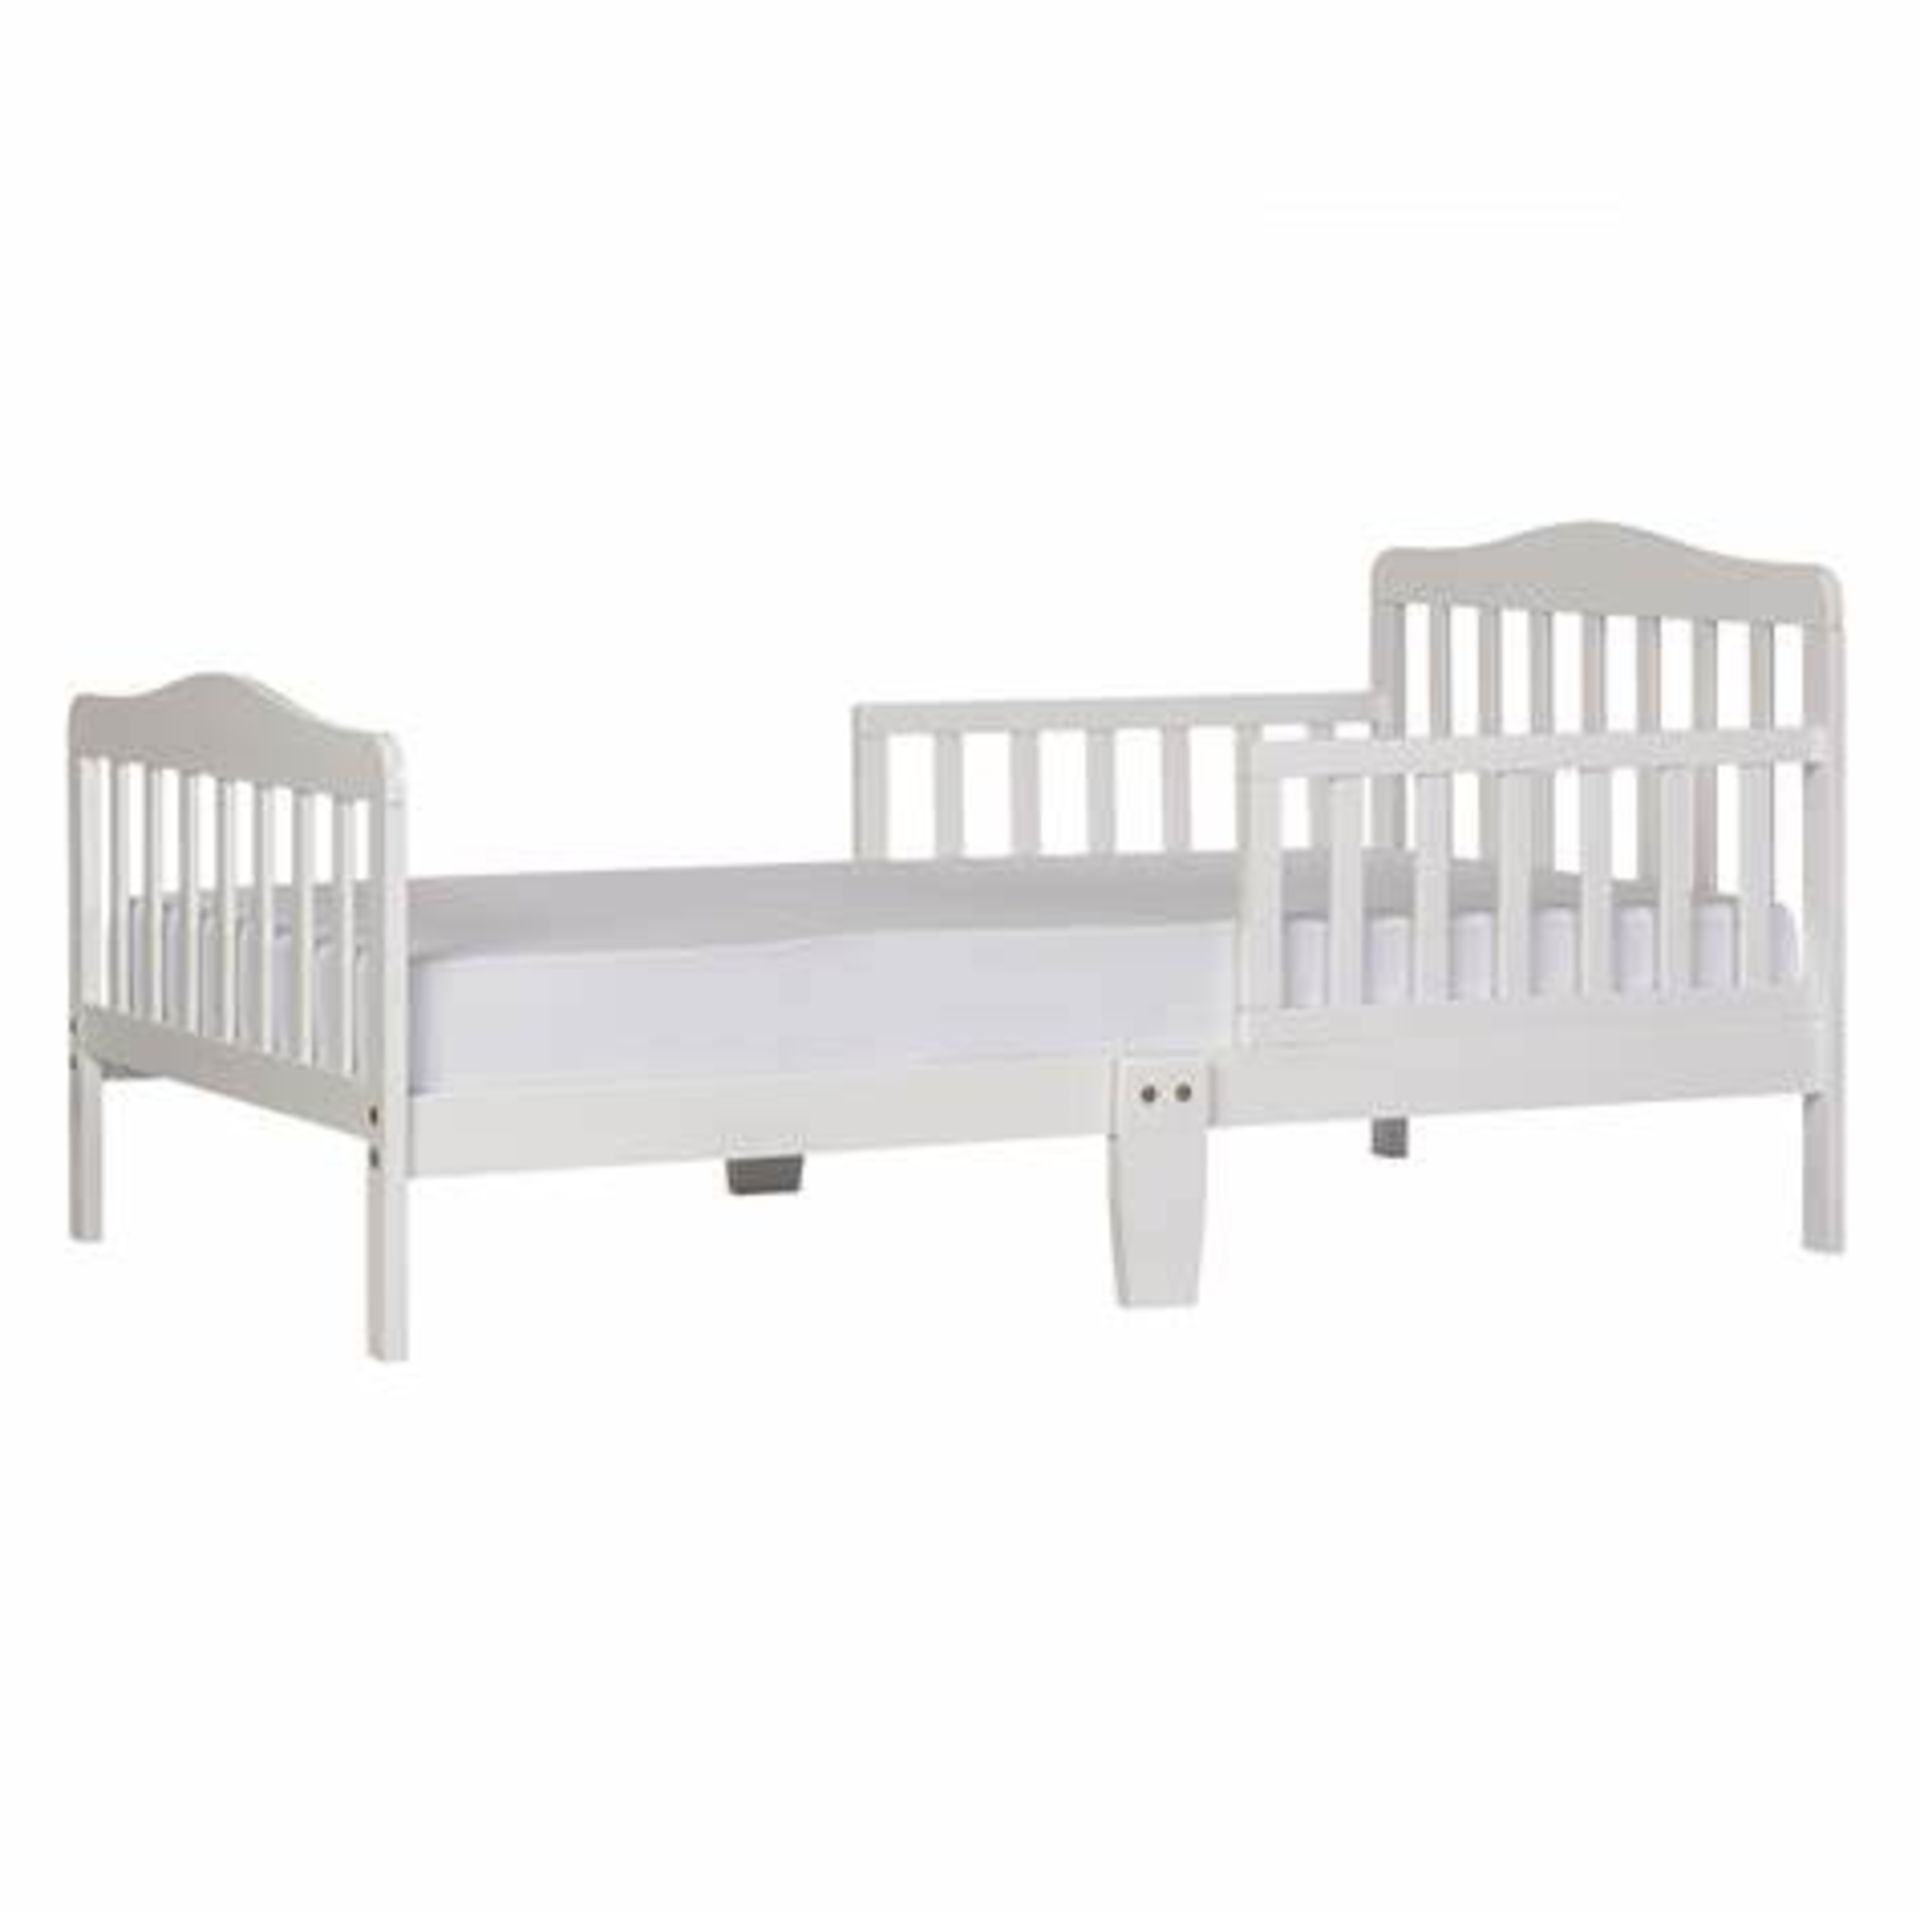 20 X Brand New Dream on Me Classic Toddler BedS. Product dimensionS - 144.8L x 71.1W x 76.2H CM - Bild 2 aus 4